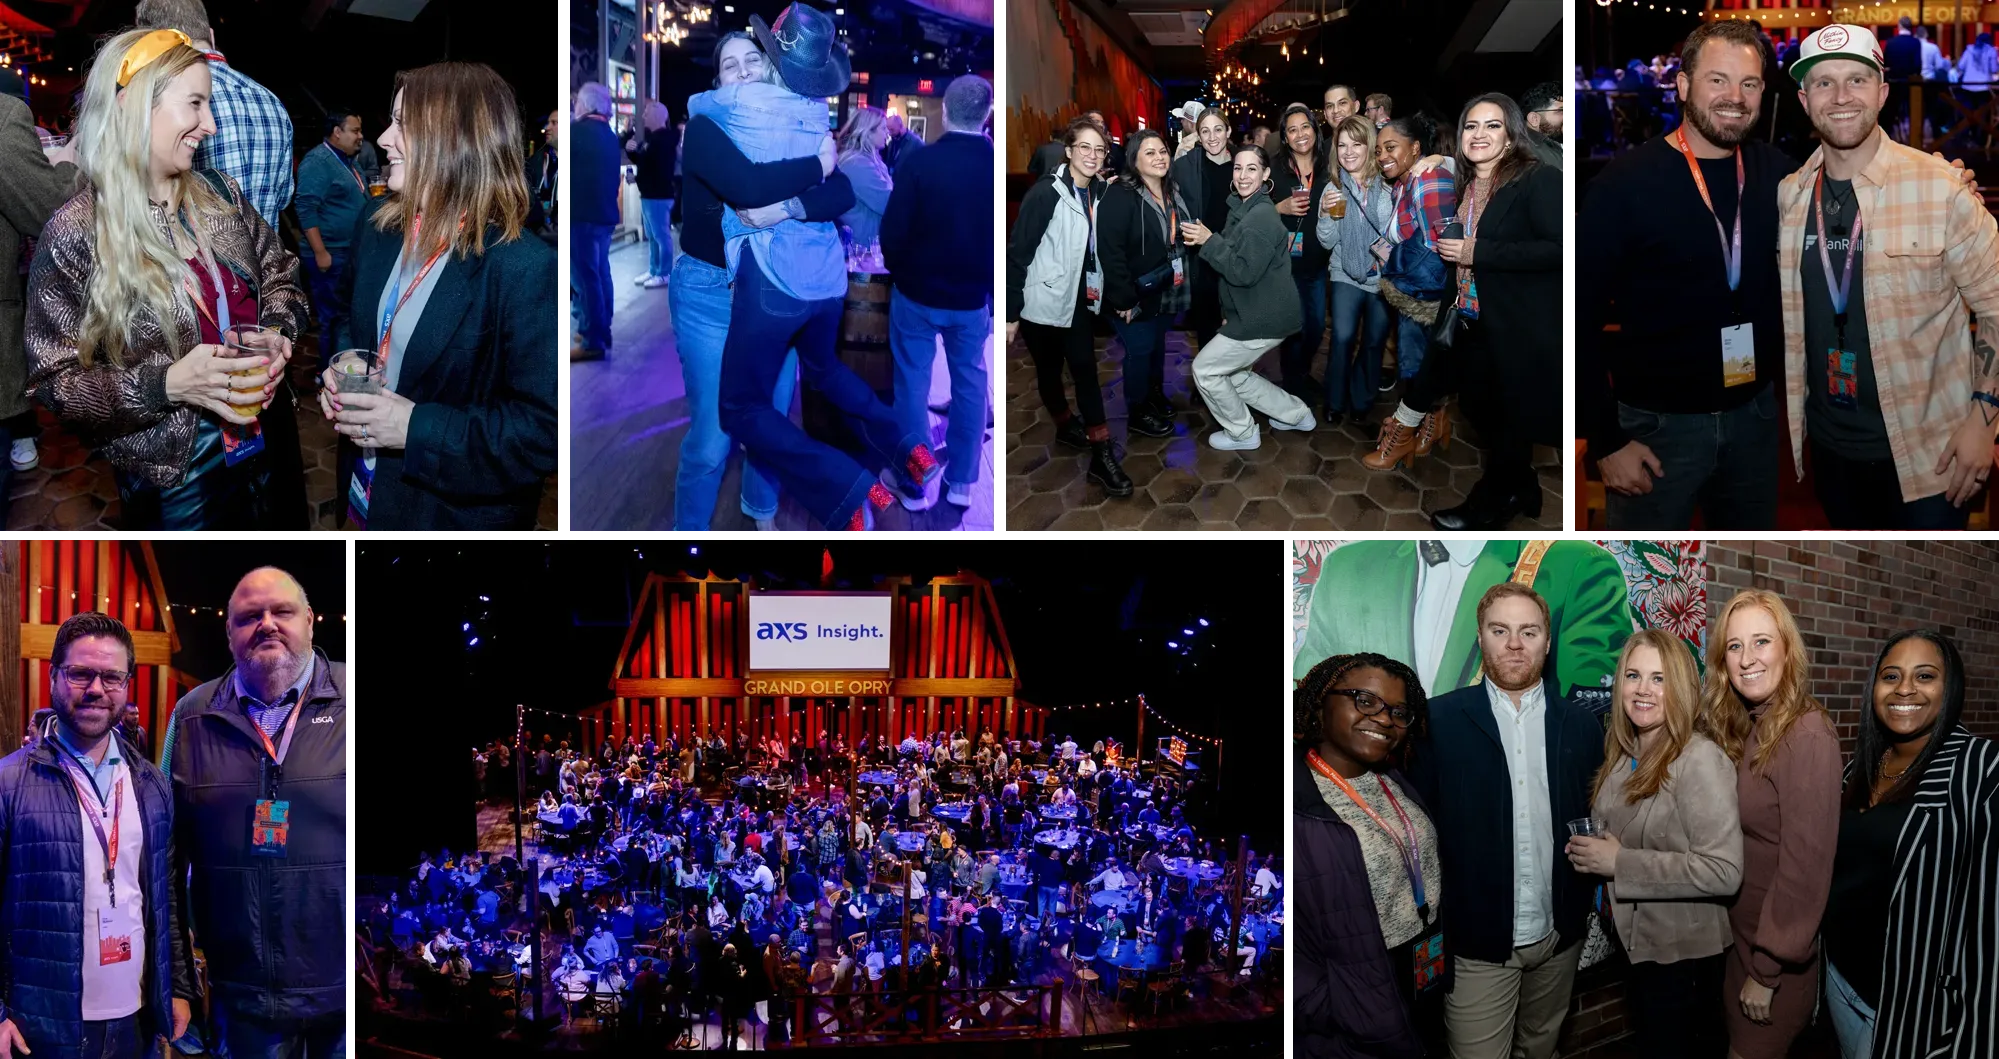 Photo collage of AXS Insight social events.